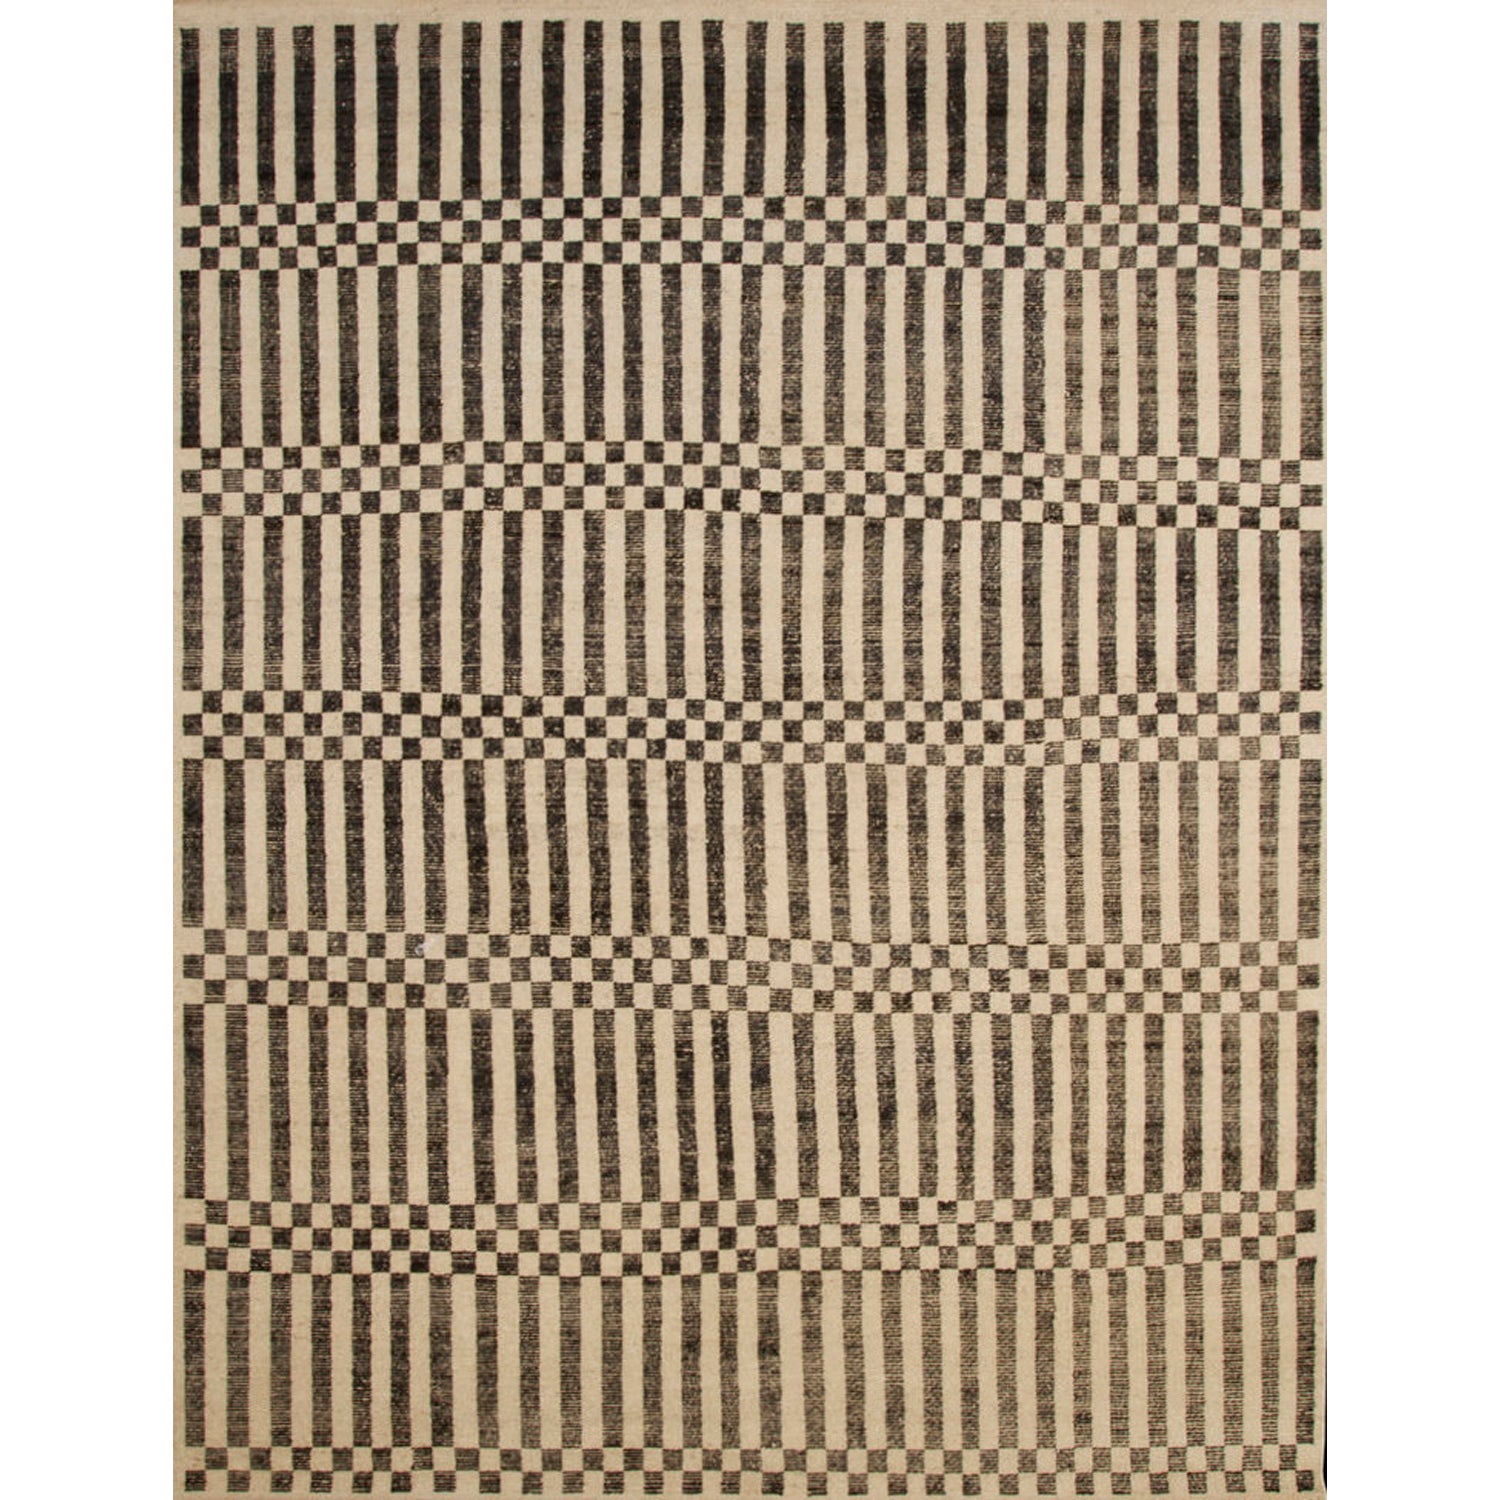 Large rectangular rug in a minimalist plaid pattern of black stripes and checks on a tan background.